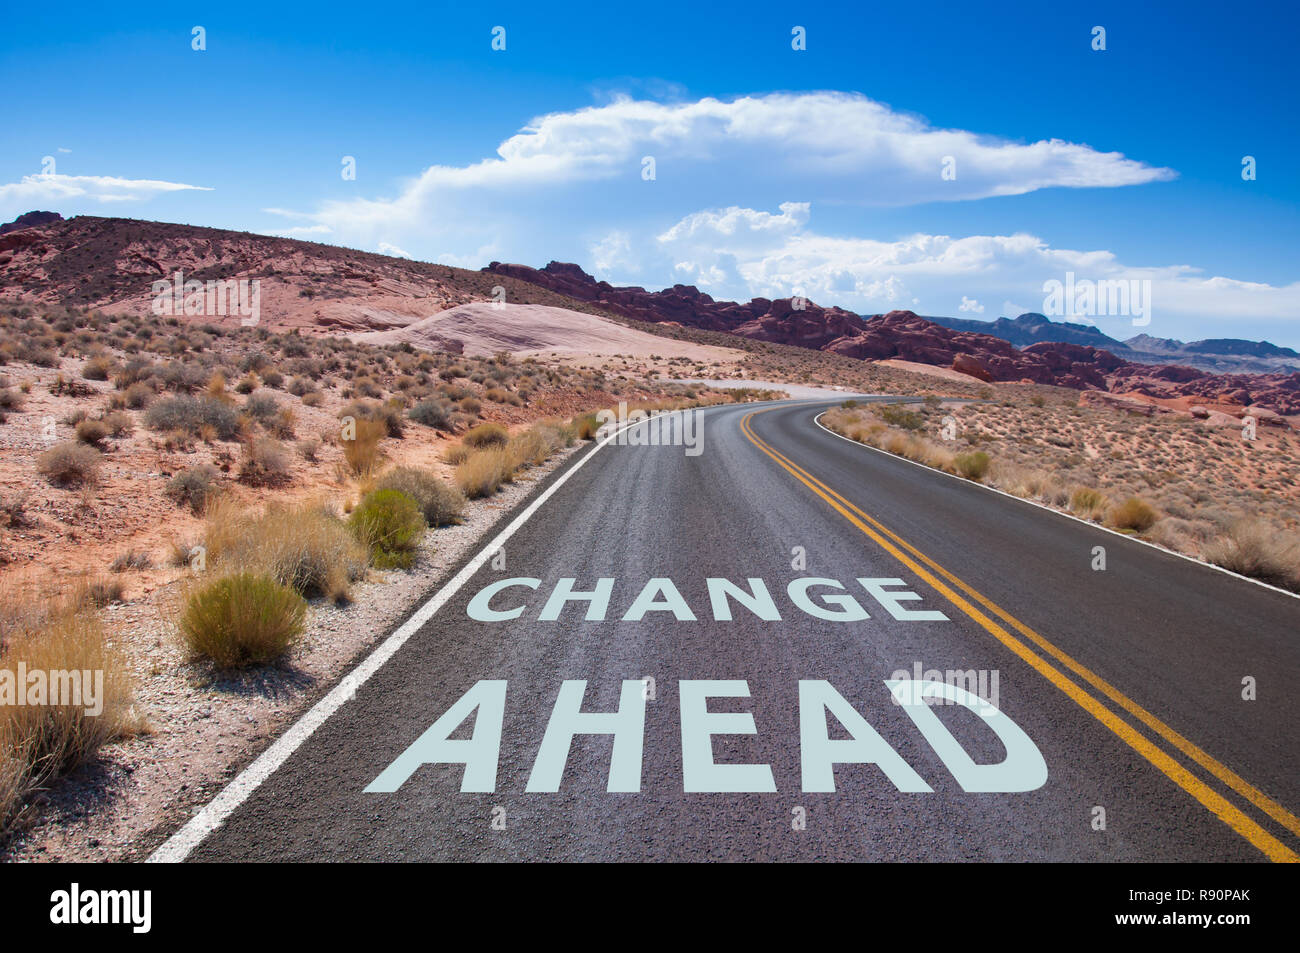 The text 'Change ahead' written on a empty road in the desert of Nevada before the street turns right Stock Photo